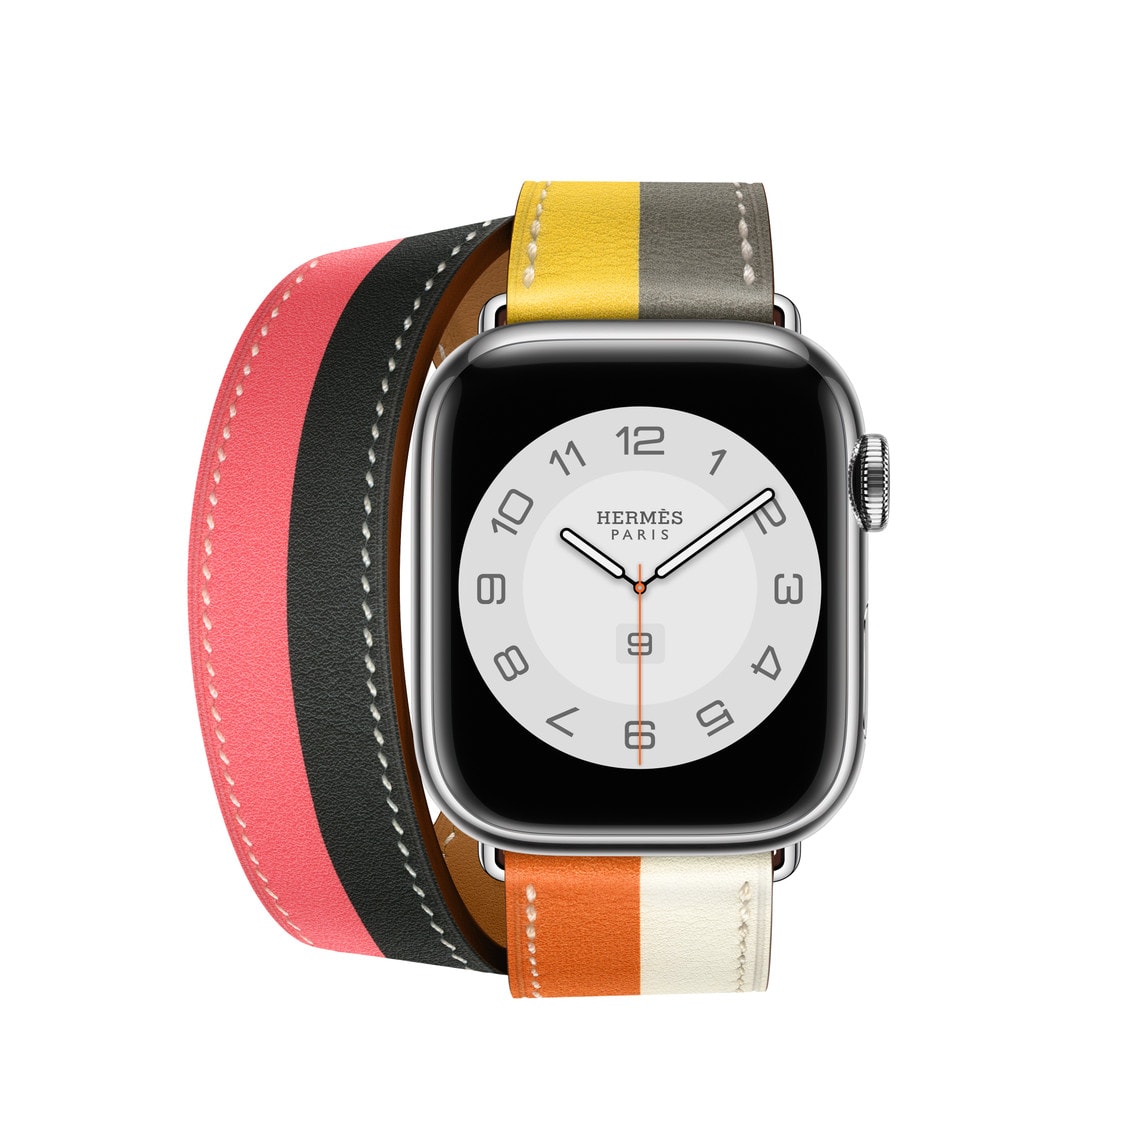 The new Hermes Casaque line of Apple Watch bands is inspired by 